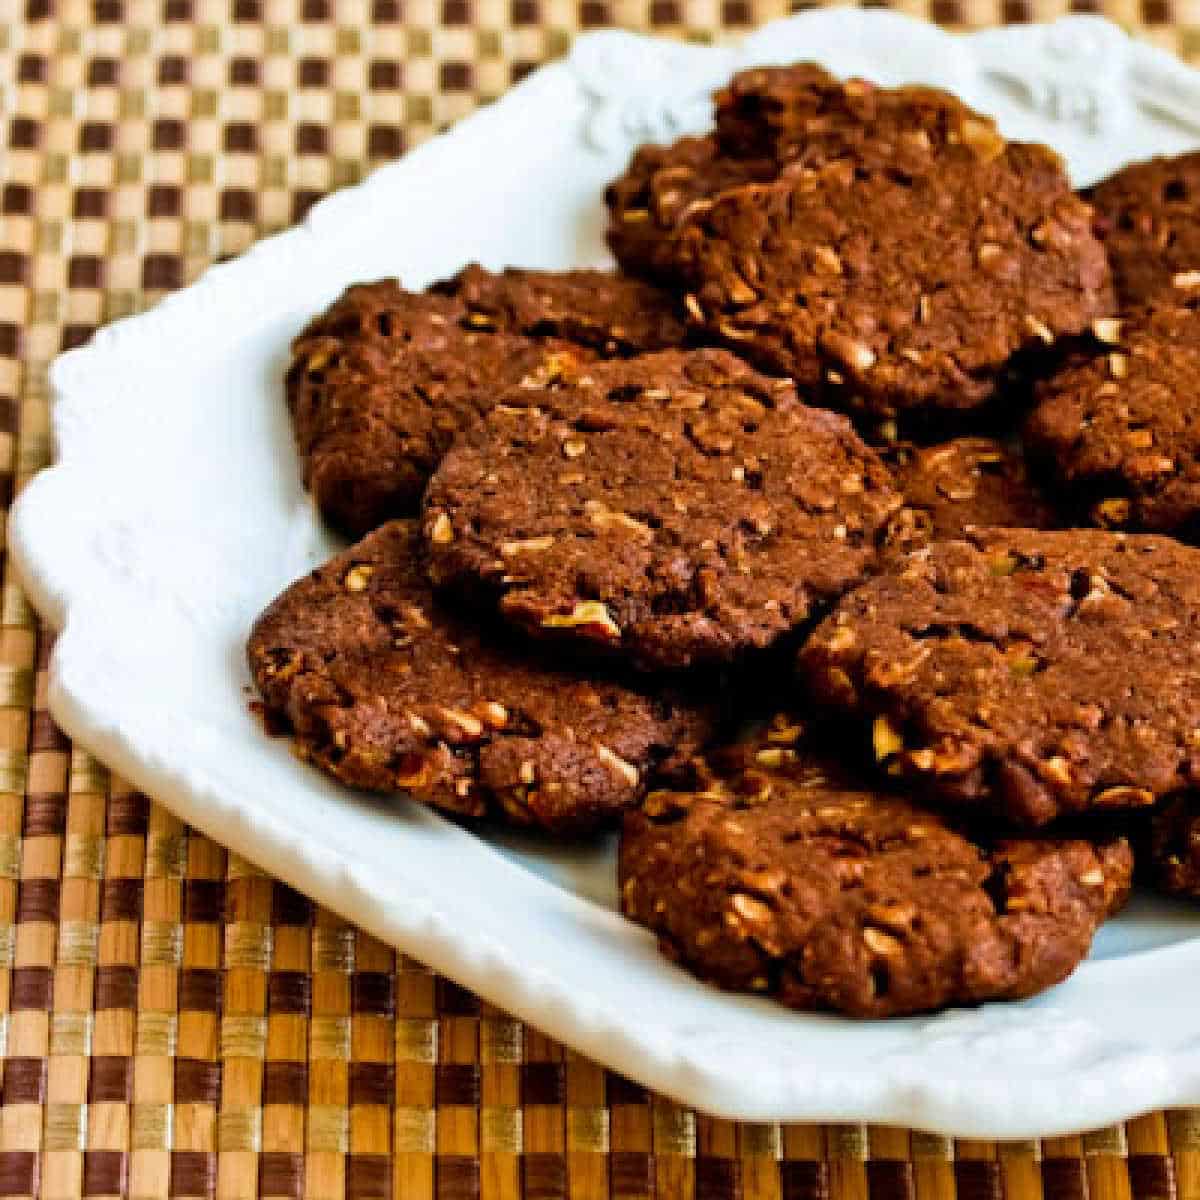 Square image for Sugar-Free Chocolate Pecan Cookies shown on white plate.